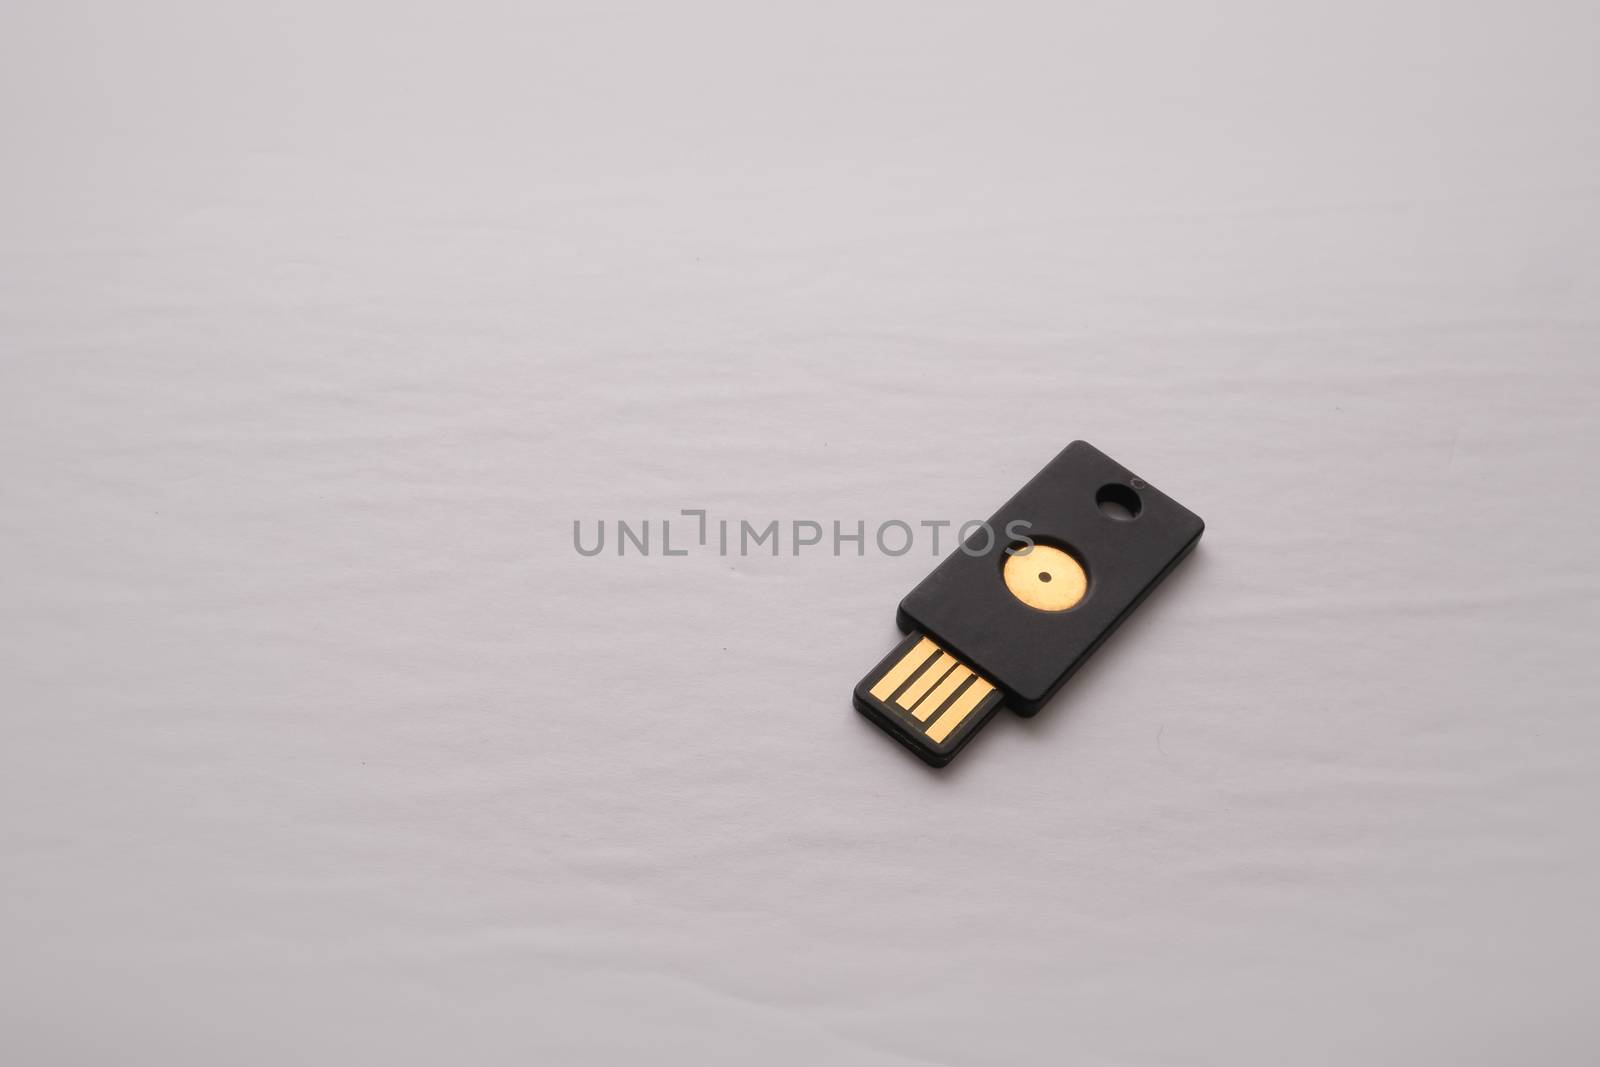 An isolated USB device containing a security key is used for two-factor authentication adding a layer of security to logins and authorization online.